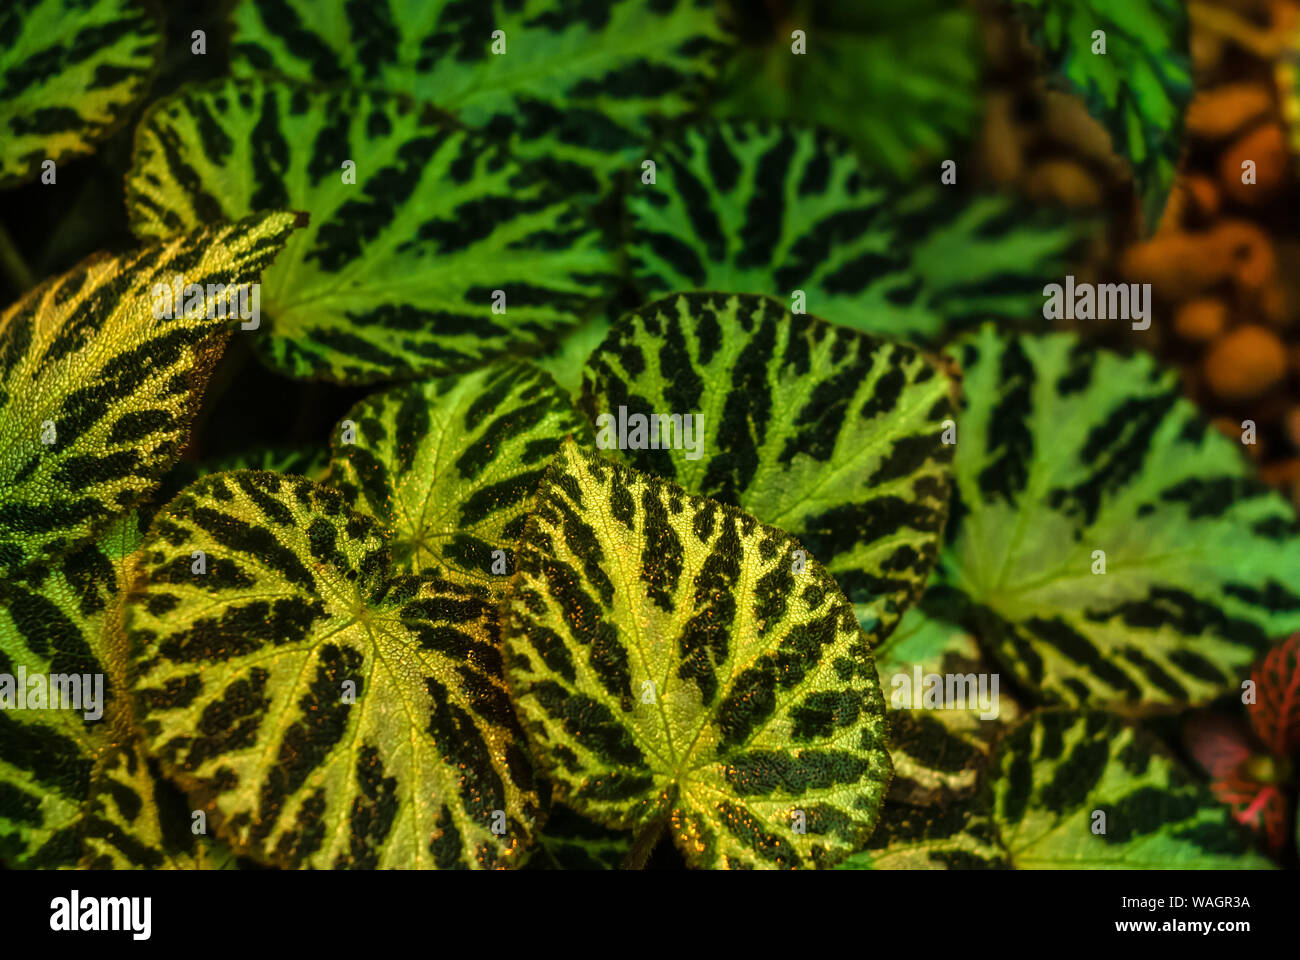 golden green blurred misty floral background with patterned leaves of begonia masoniana in the foreground Stock Photo